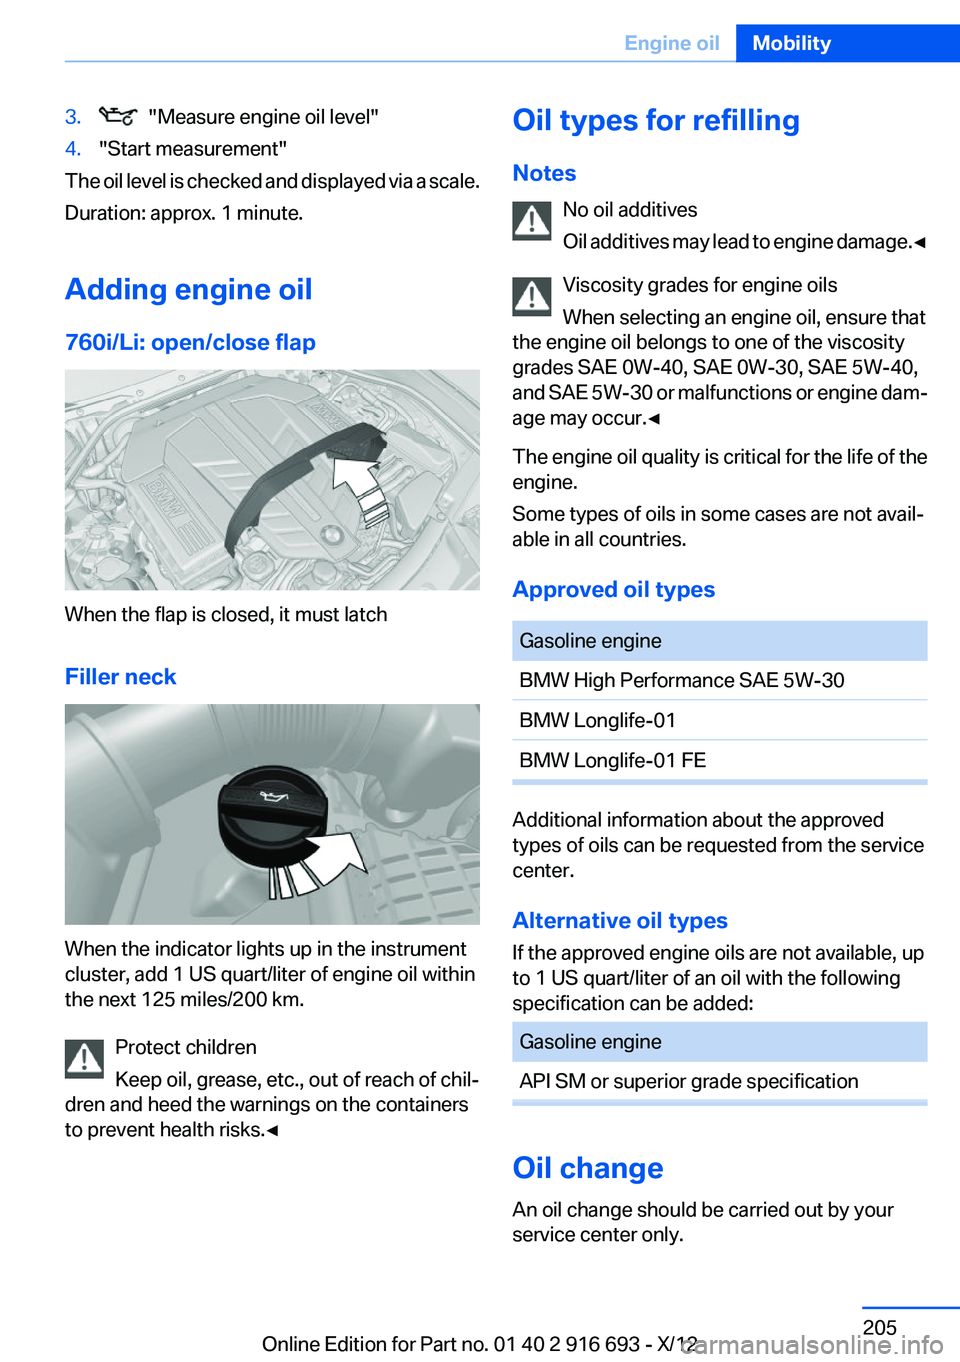 BMW 740I 2013  Owners Manual 3.  "Measure engine oil level"4."Start measurement"
The oil level is checked and displayed via a scale.
Duration: approx. 1 minute.
Adding engine oil
760i/Li: open/close flap
When the 